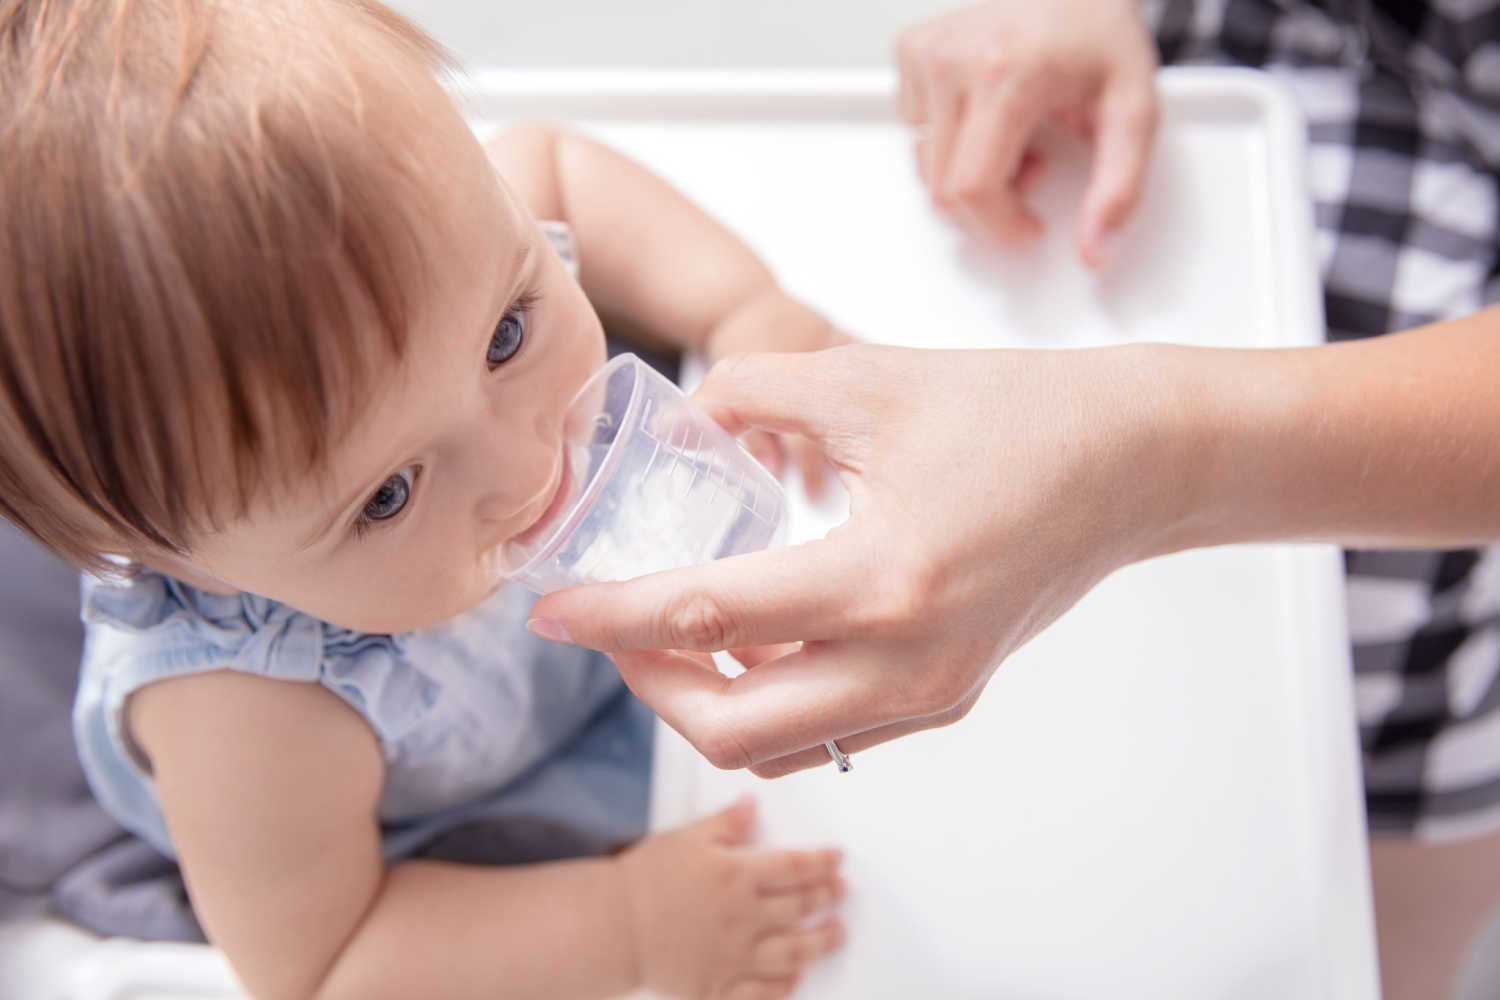 Help Your Baby Drink From an Open Cup